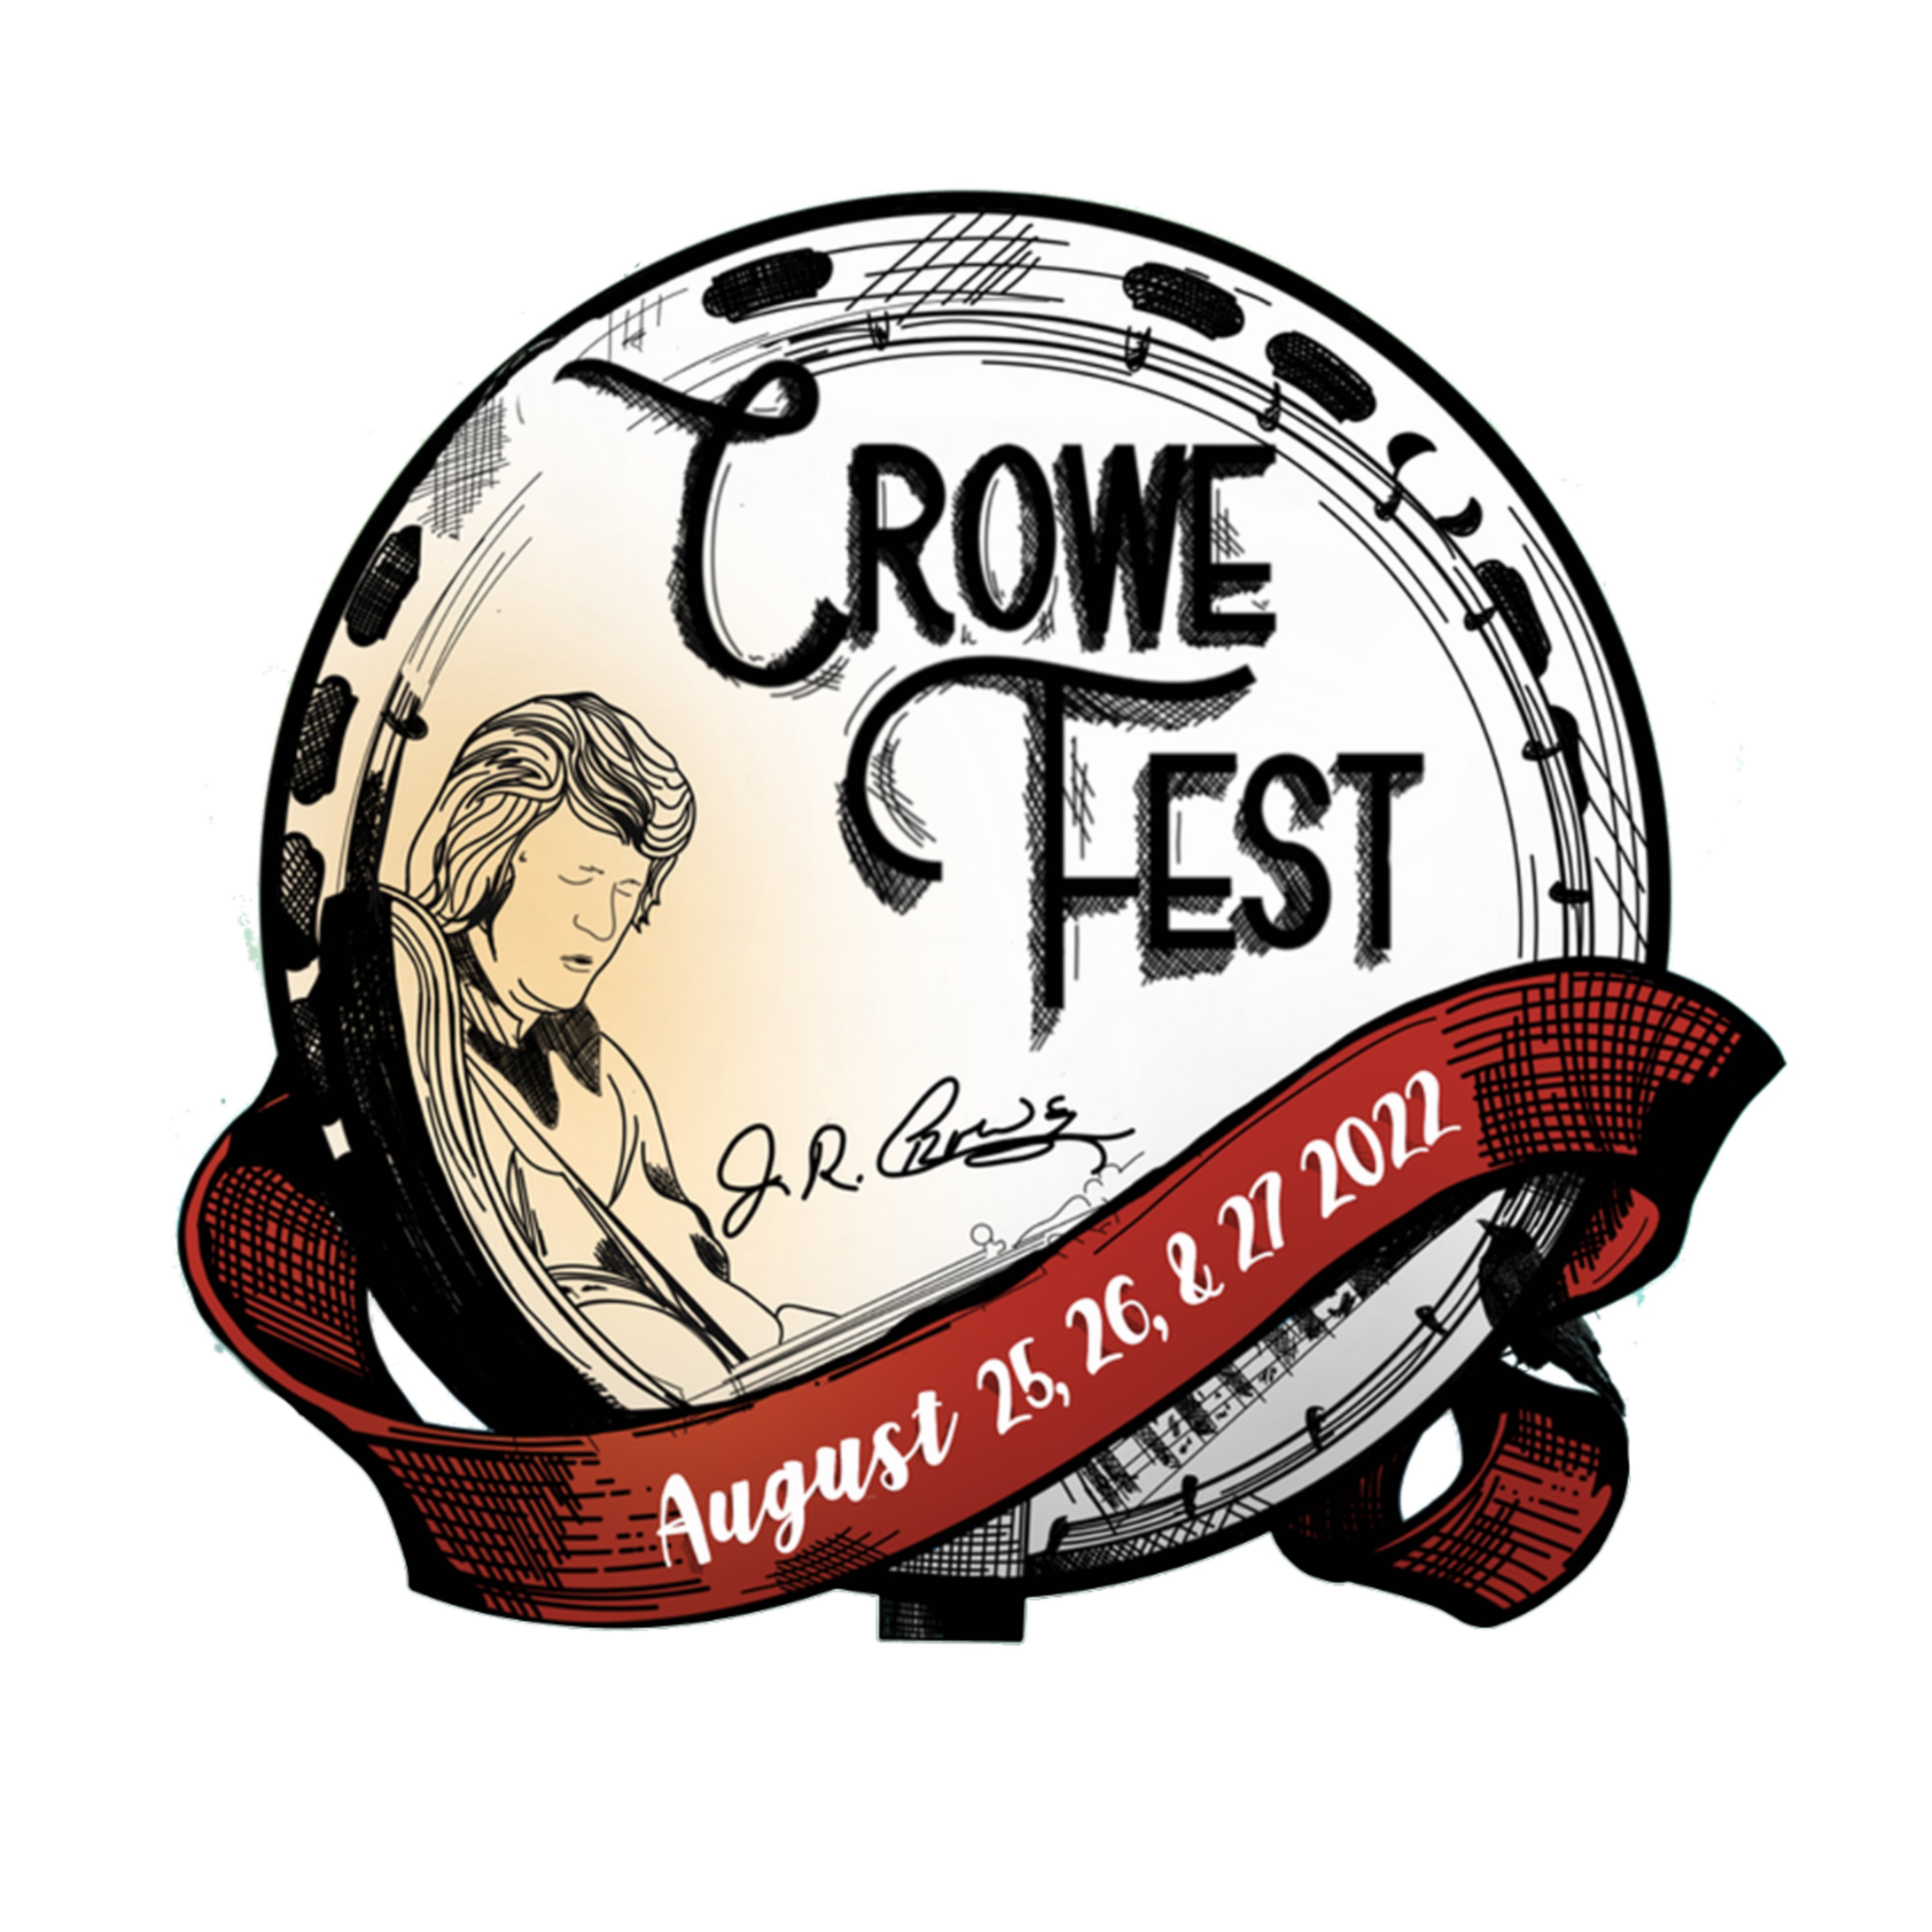  CROWE FEST Set For August 25-27 In Clay City, Kentucky - Celebration Of J.D. Crowe Legacy